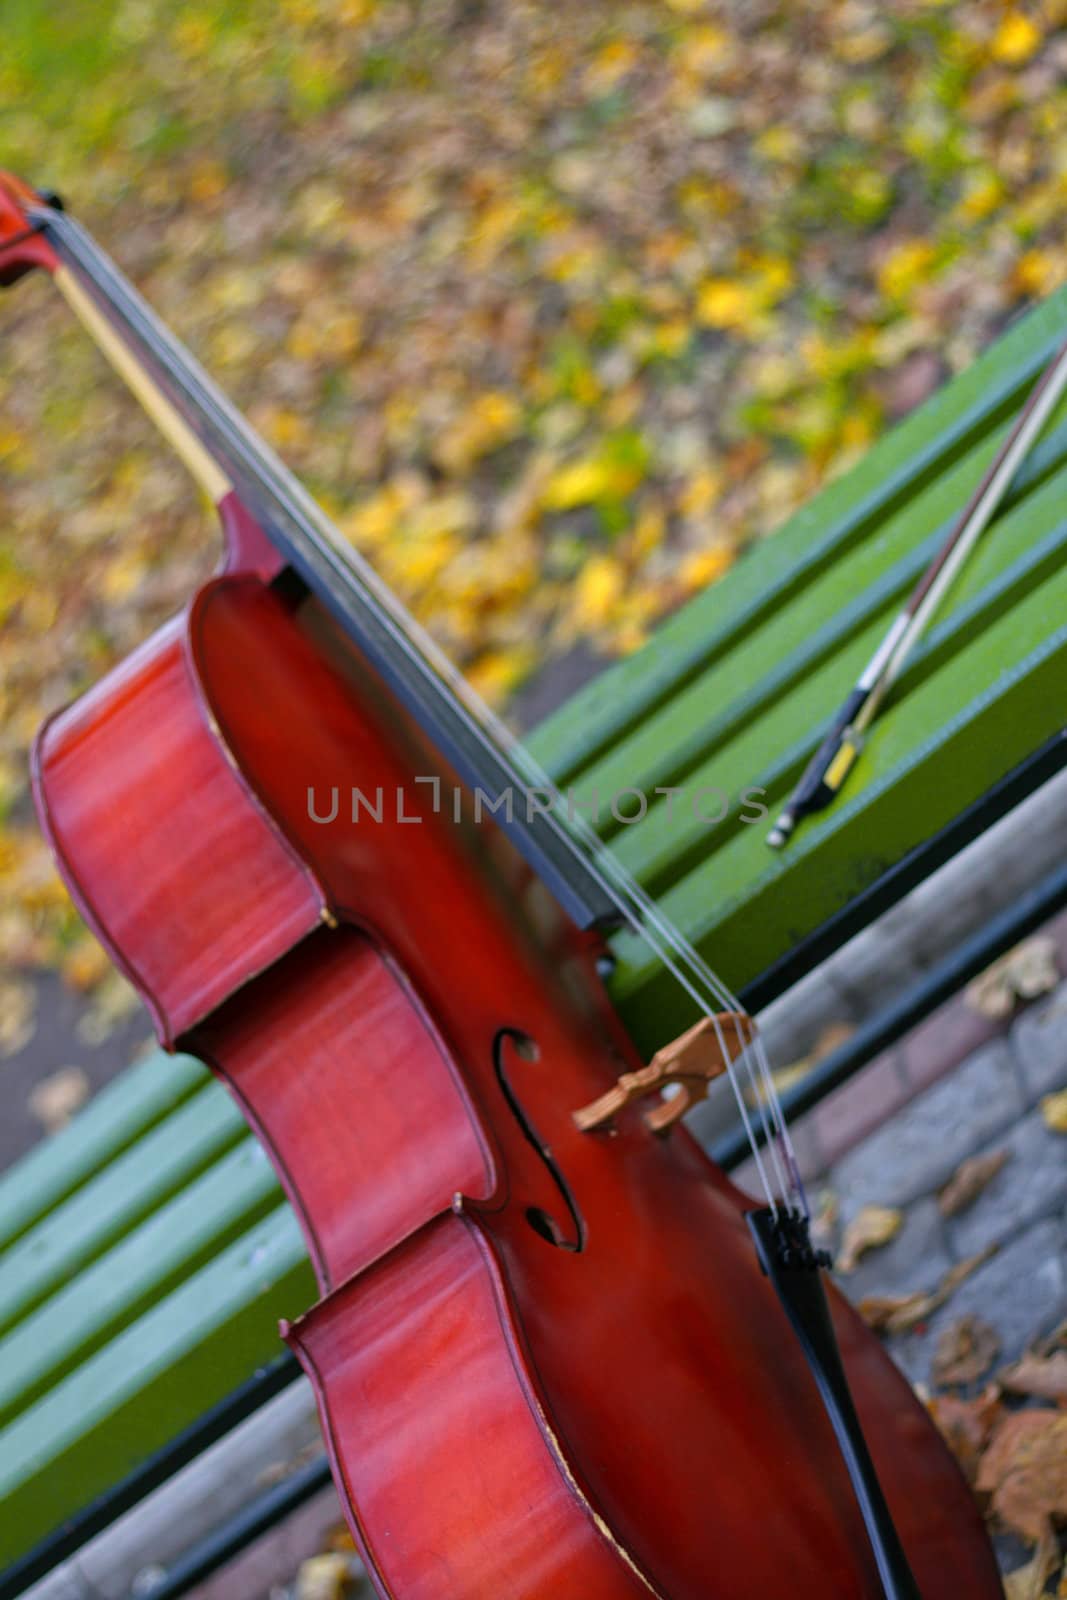 Violoncello on a bench in ����� in the autumn